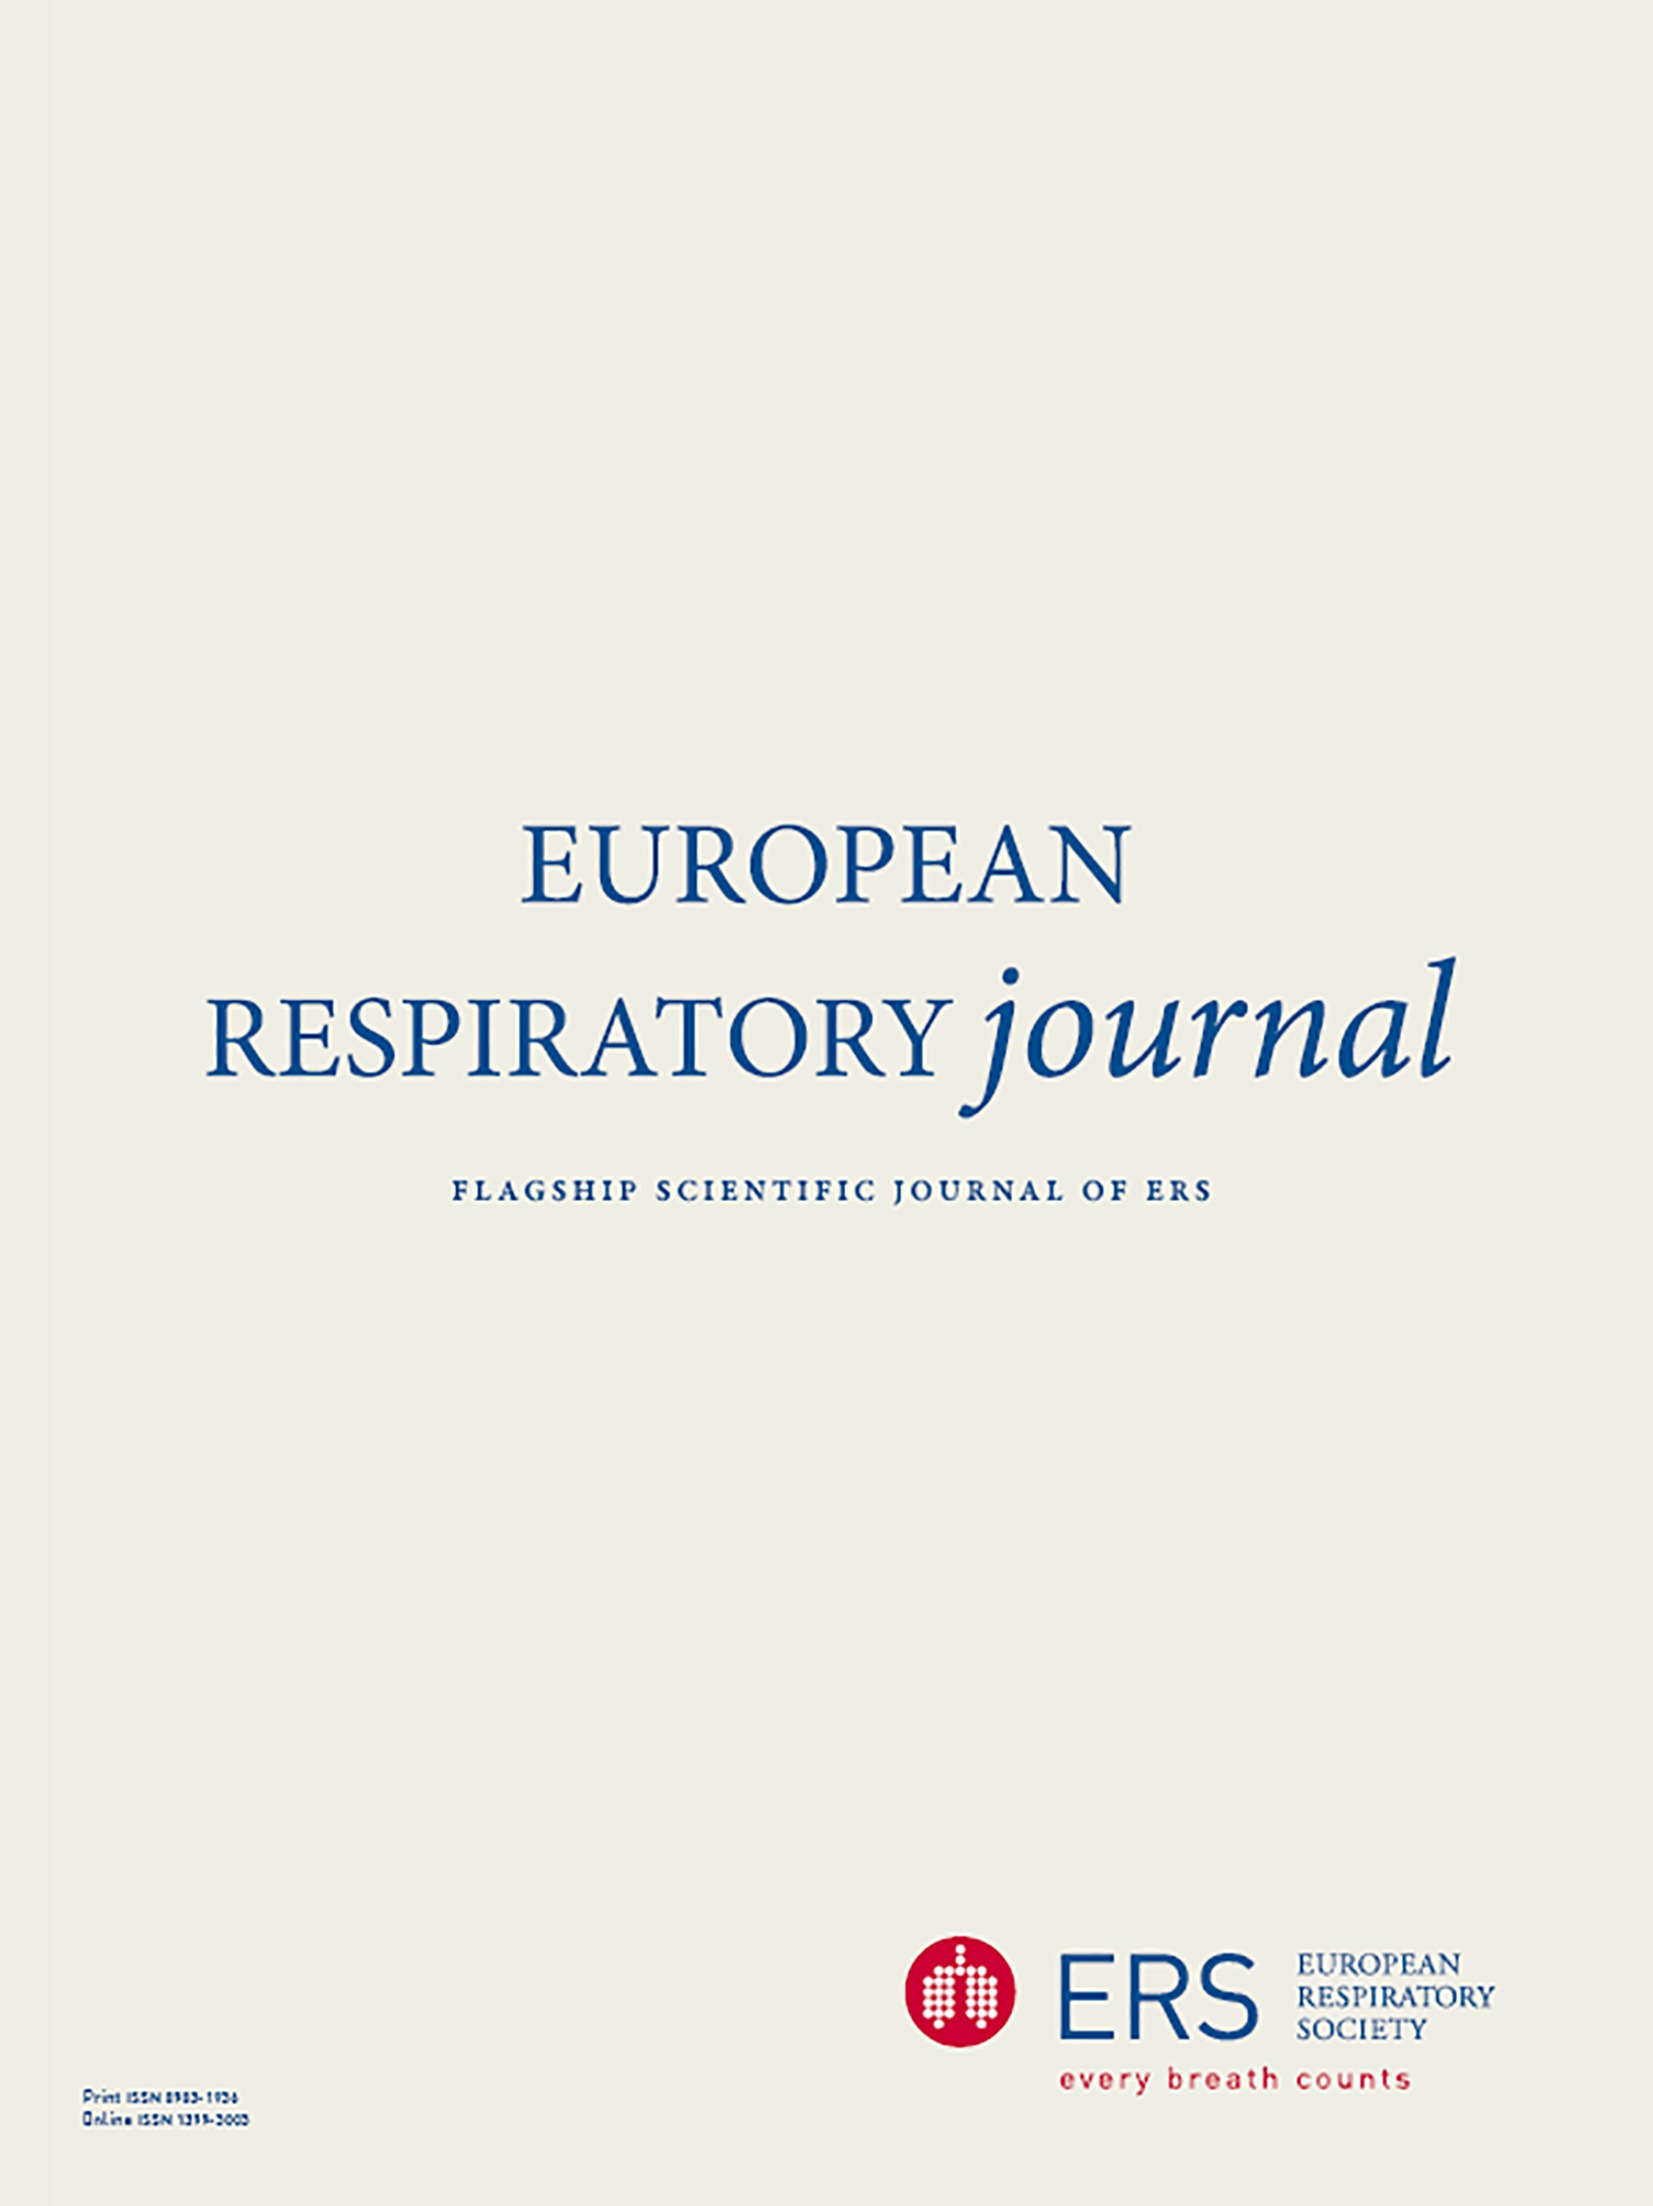 Hypoxic burden to guide CPAP treatment allocation in patients with obstructive sleep apnoea: a post hoc study of the ISAACC trial